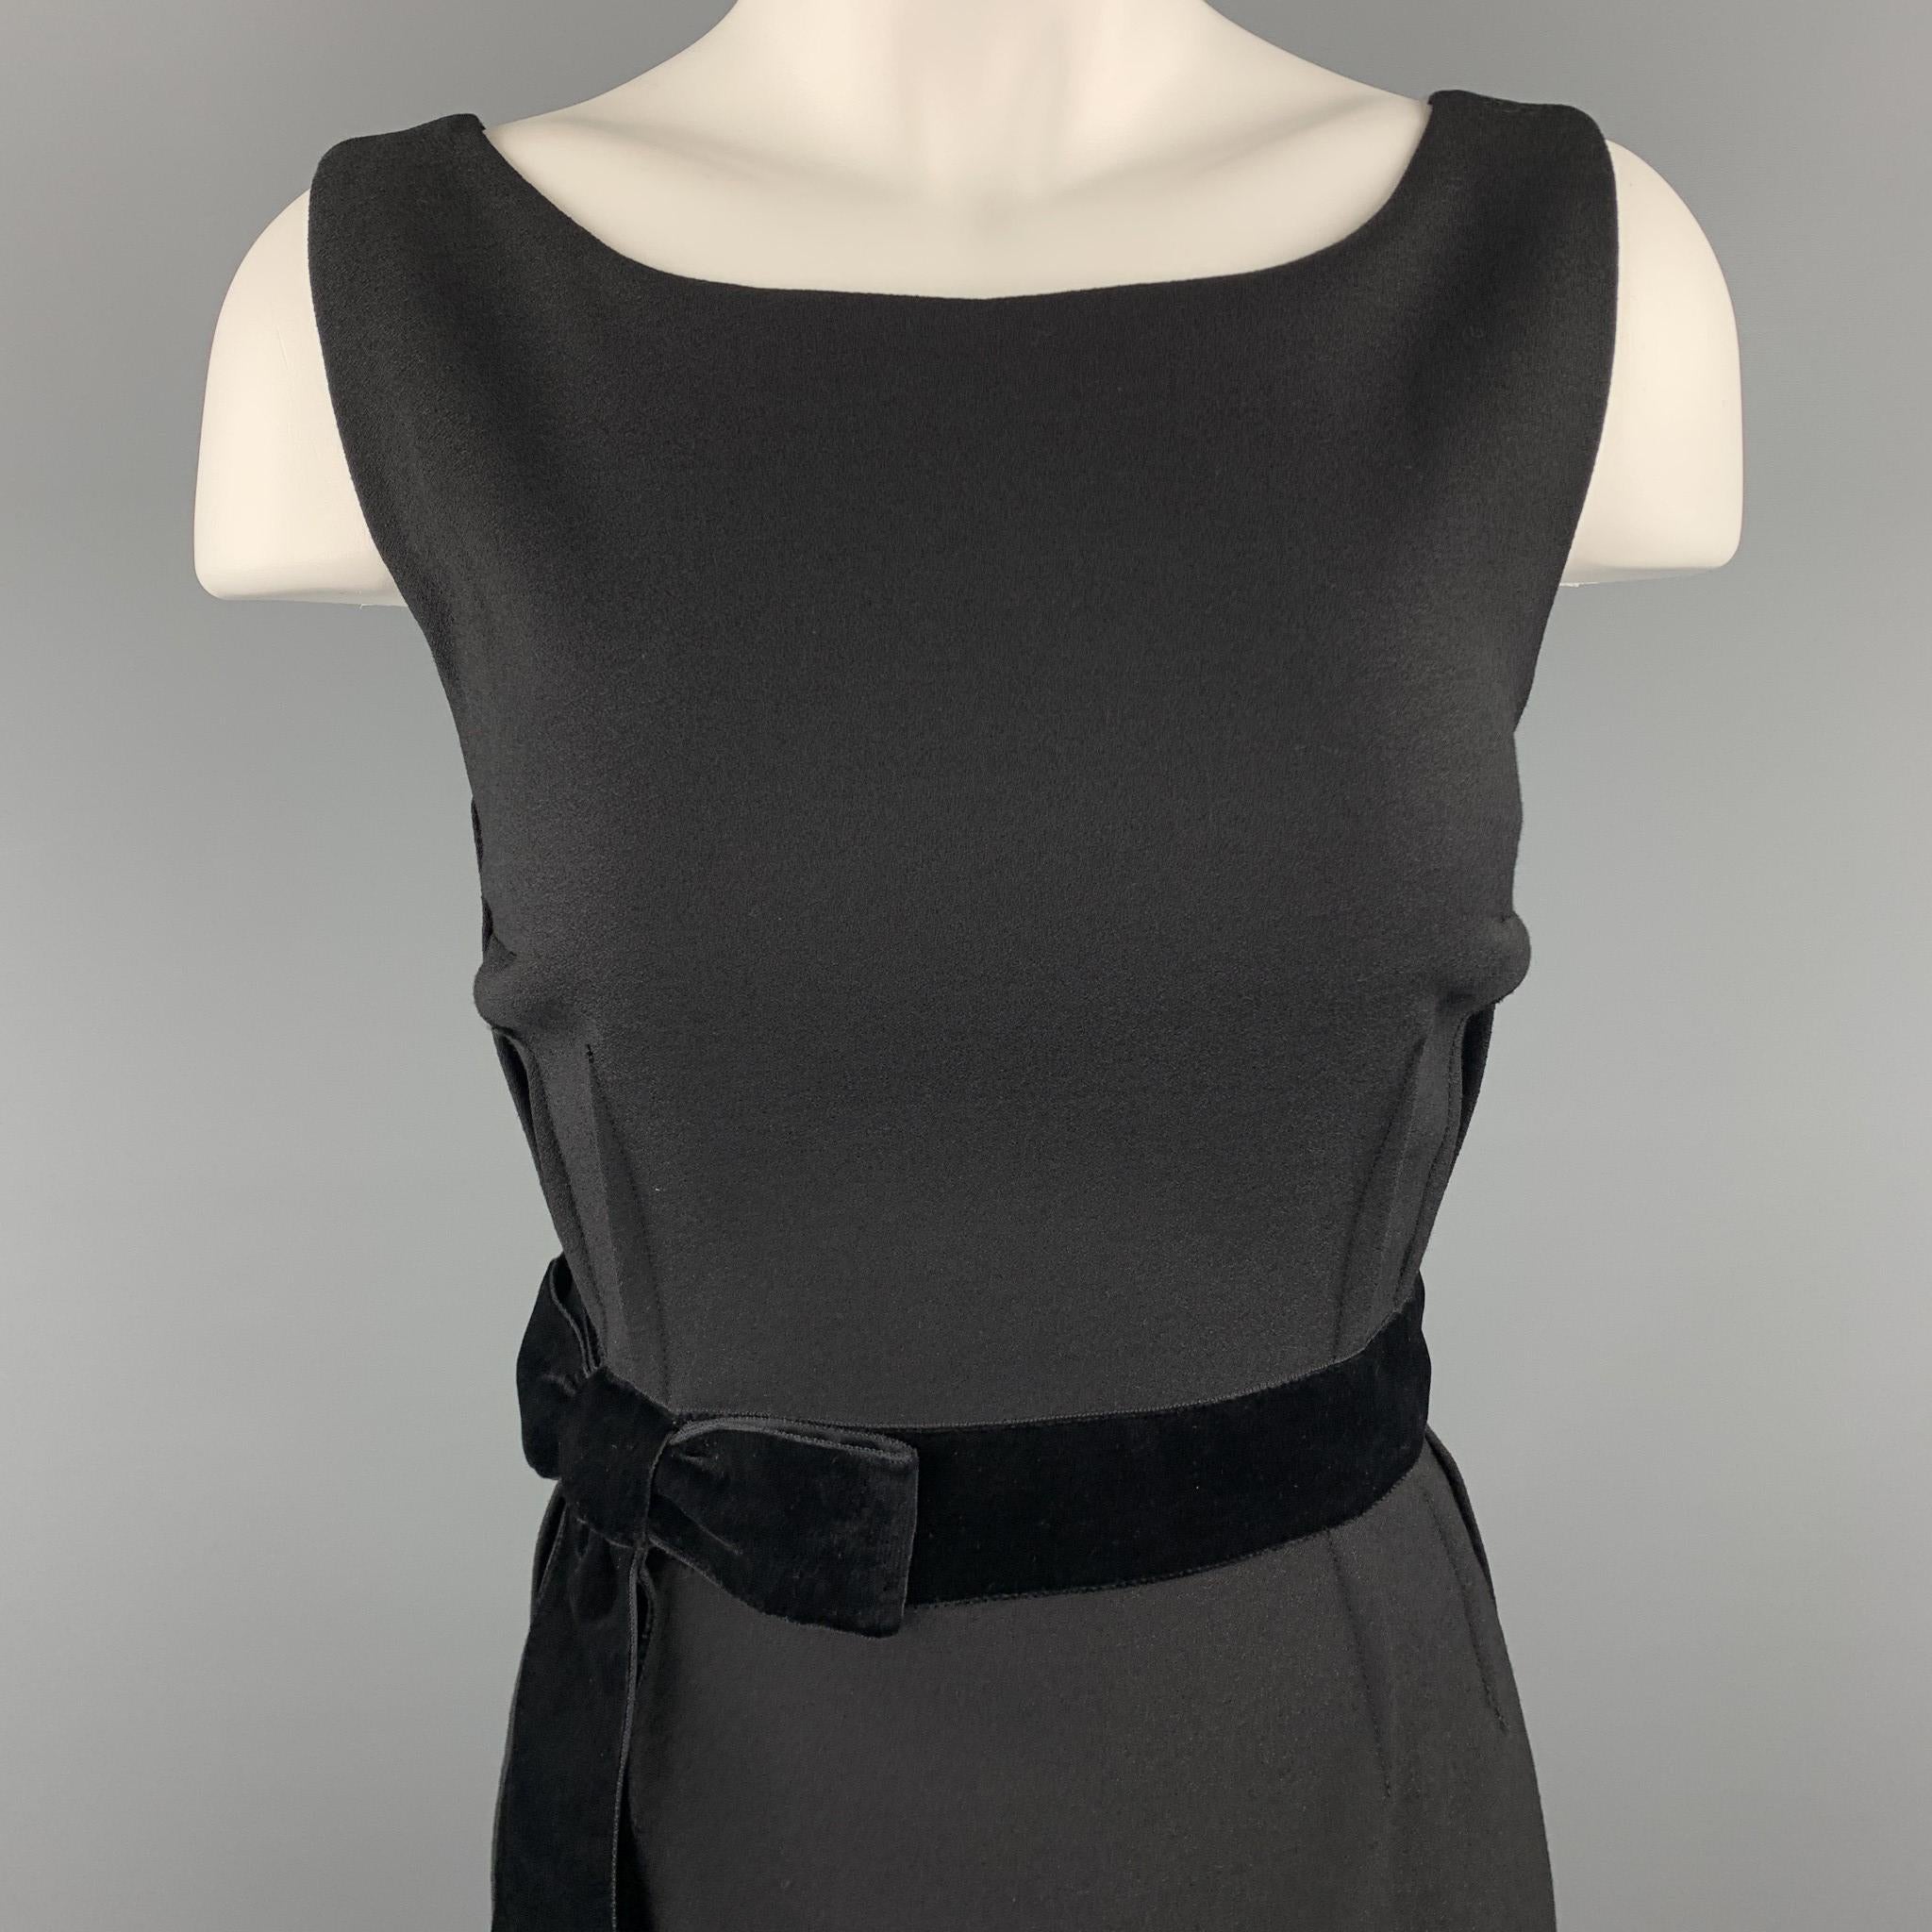 Sleeveless DOLCE & GABBANA shift dress comes in black virgin wool crepe with a boat neckline, outter dart construction, and velvet bow detail. Made in Italy.

Excellent Pre-Owned Condition.
Marked: IT 40

Measurements:

Shoulder: 14 in.
Bust: 36